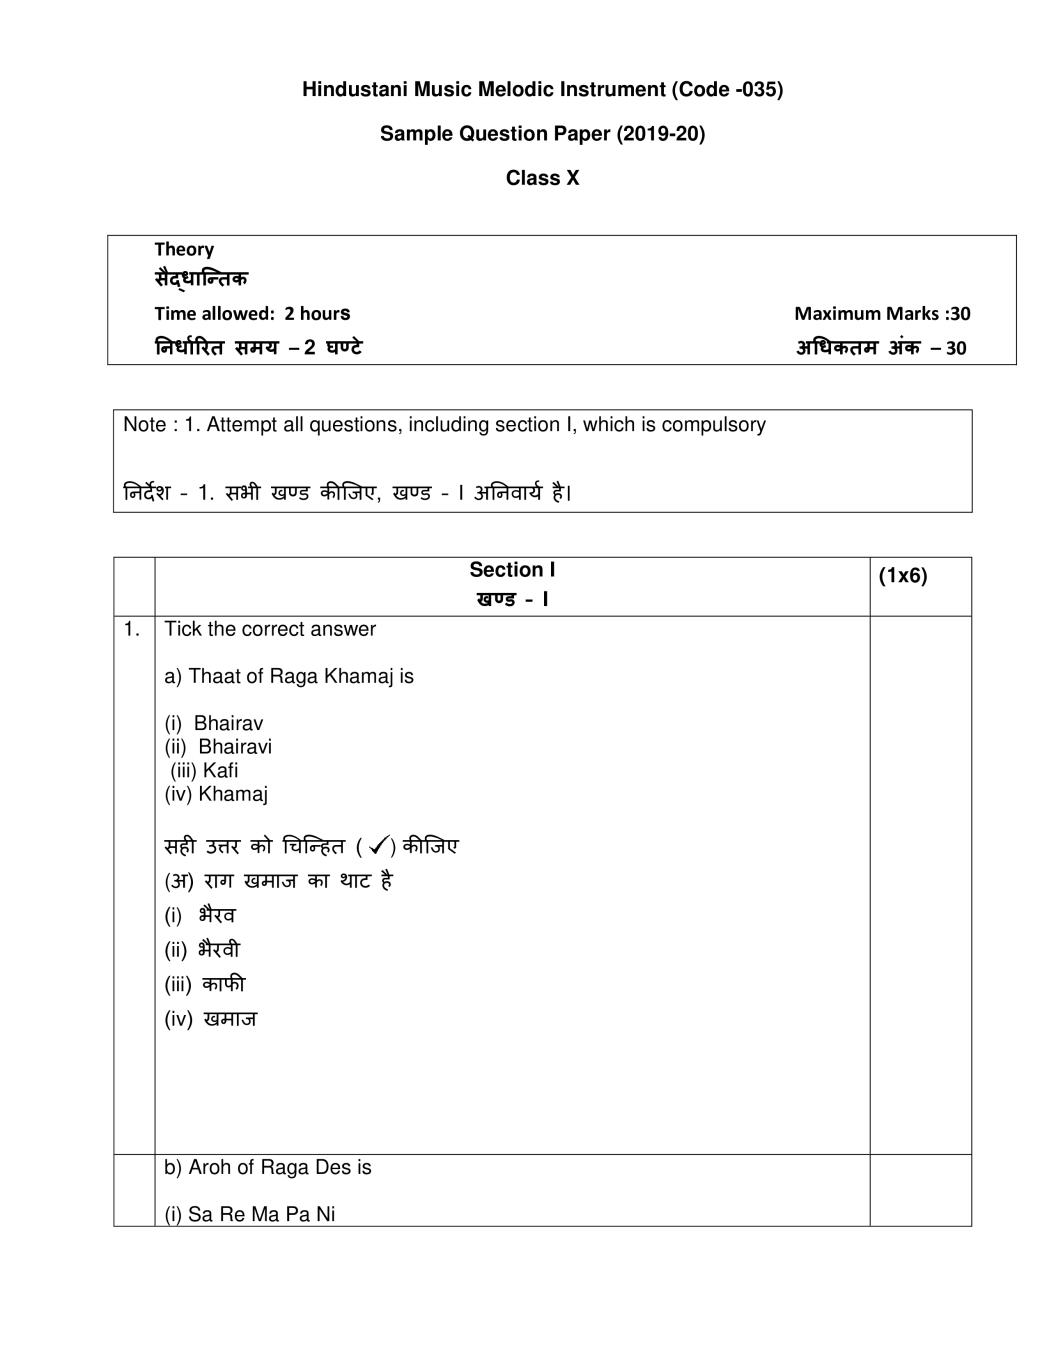 CBSE Class 10 Sample Paper 2020 for Hindustandi Melodic Instrument - Page 1